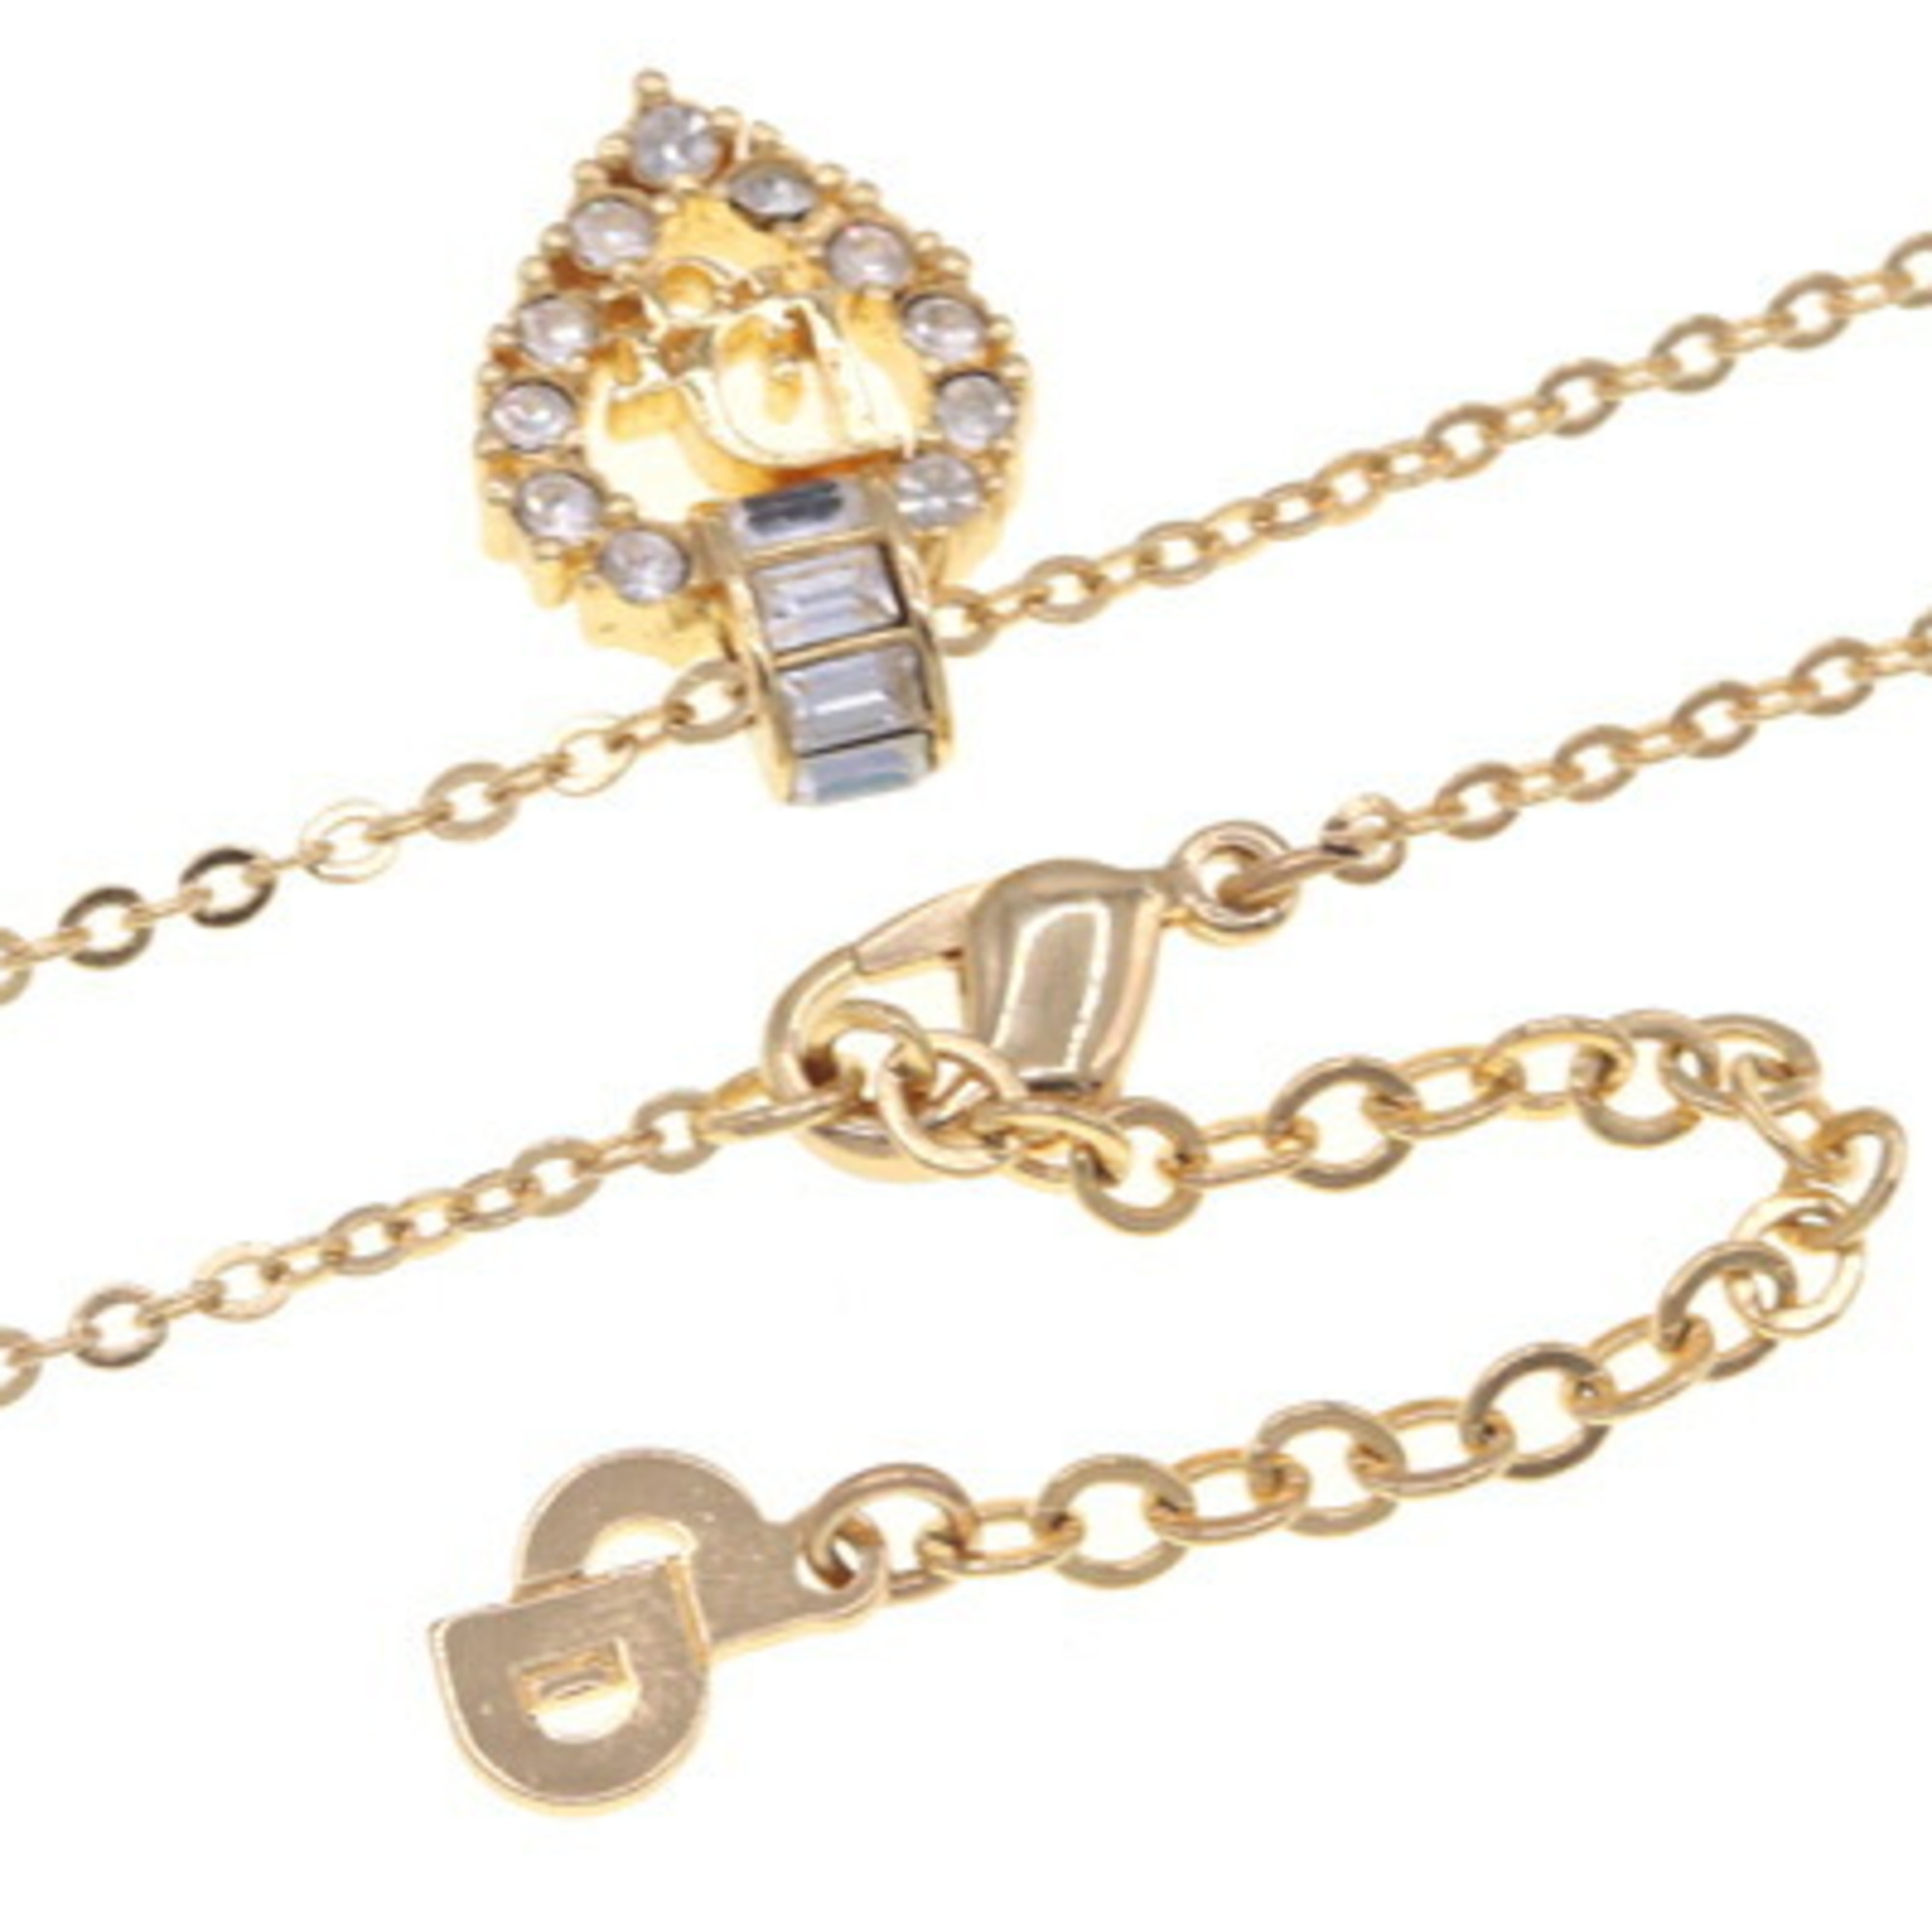 Christian Dior Dior Necklace Gold Metal Heart Stone Women's Christian